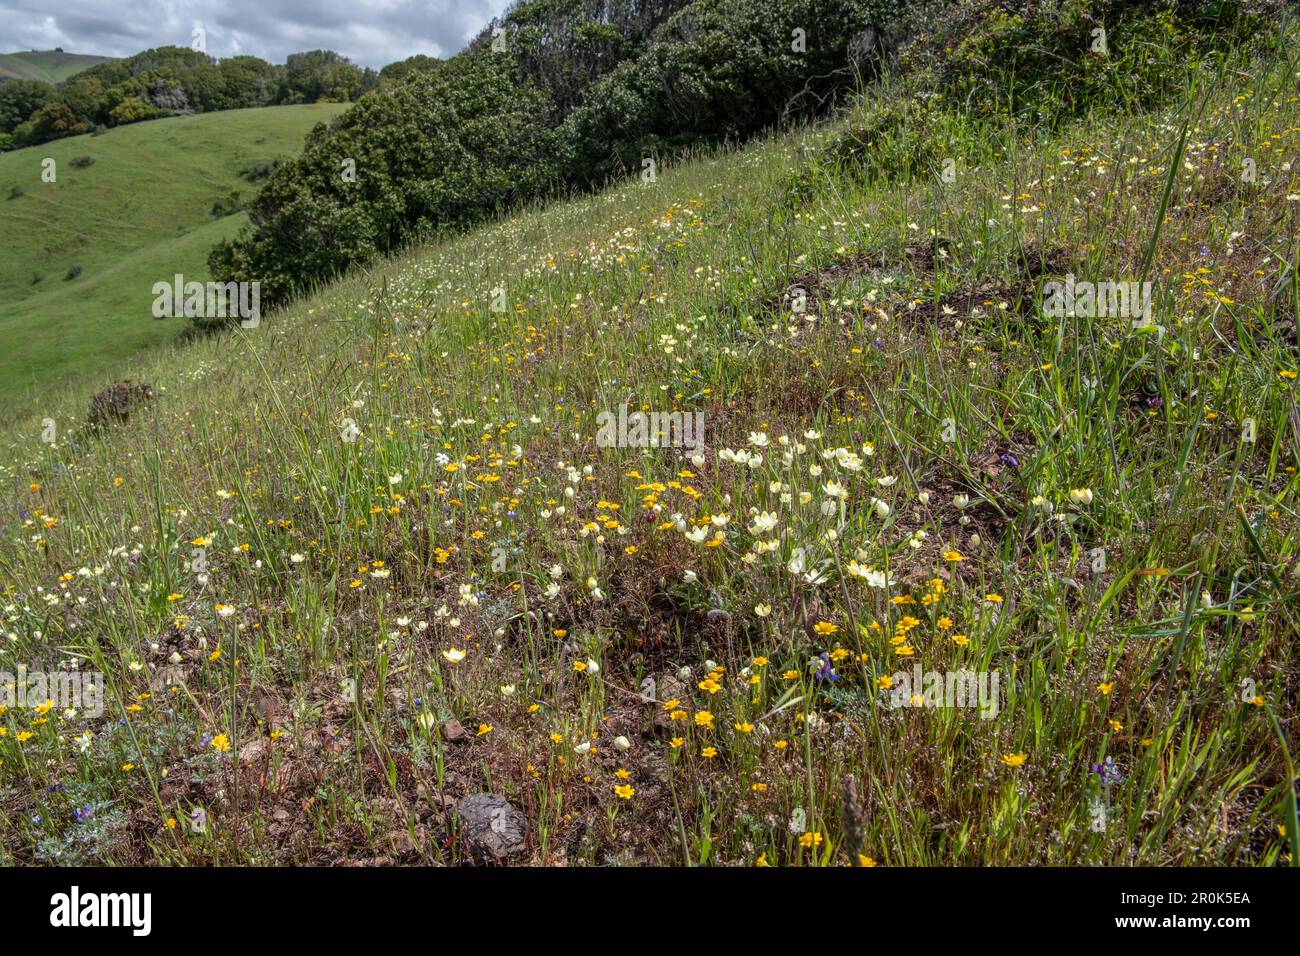 Spring time in California as mixed wildflowers bloom in a field in Marin county, CA. Stock Photo